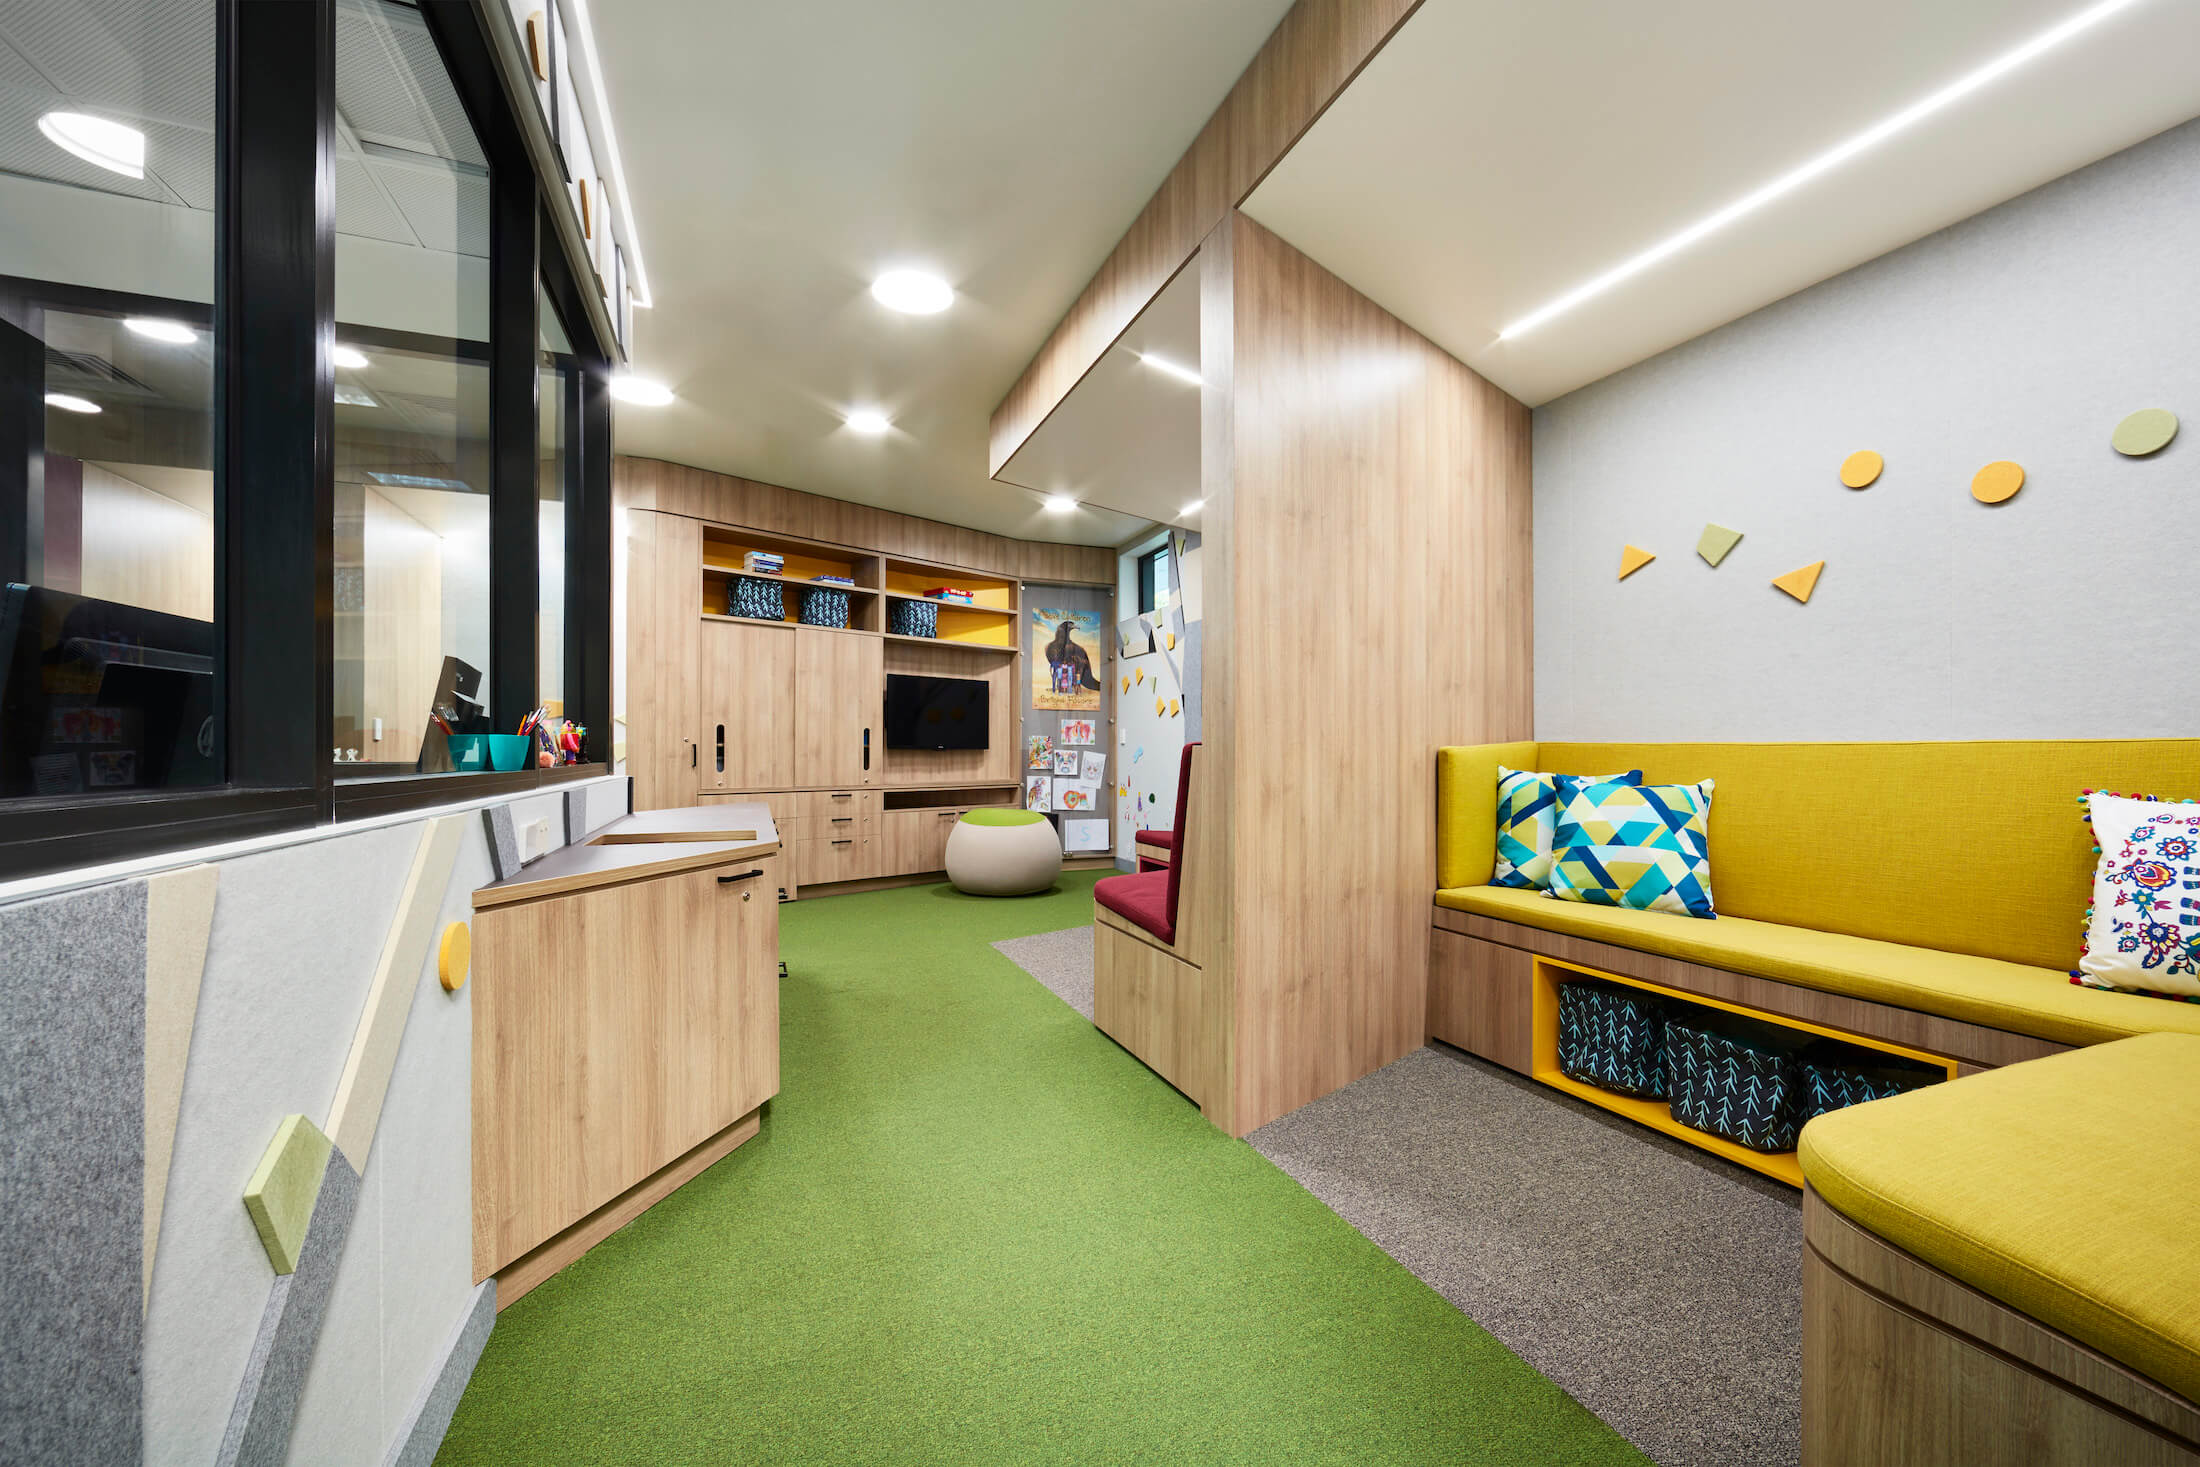 Children's cubby waiting area with staff office overlooking